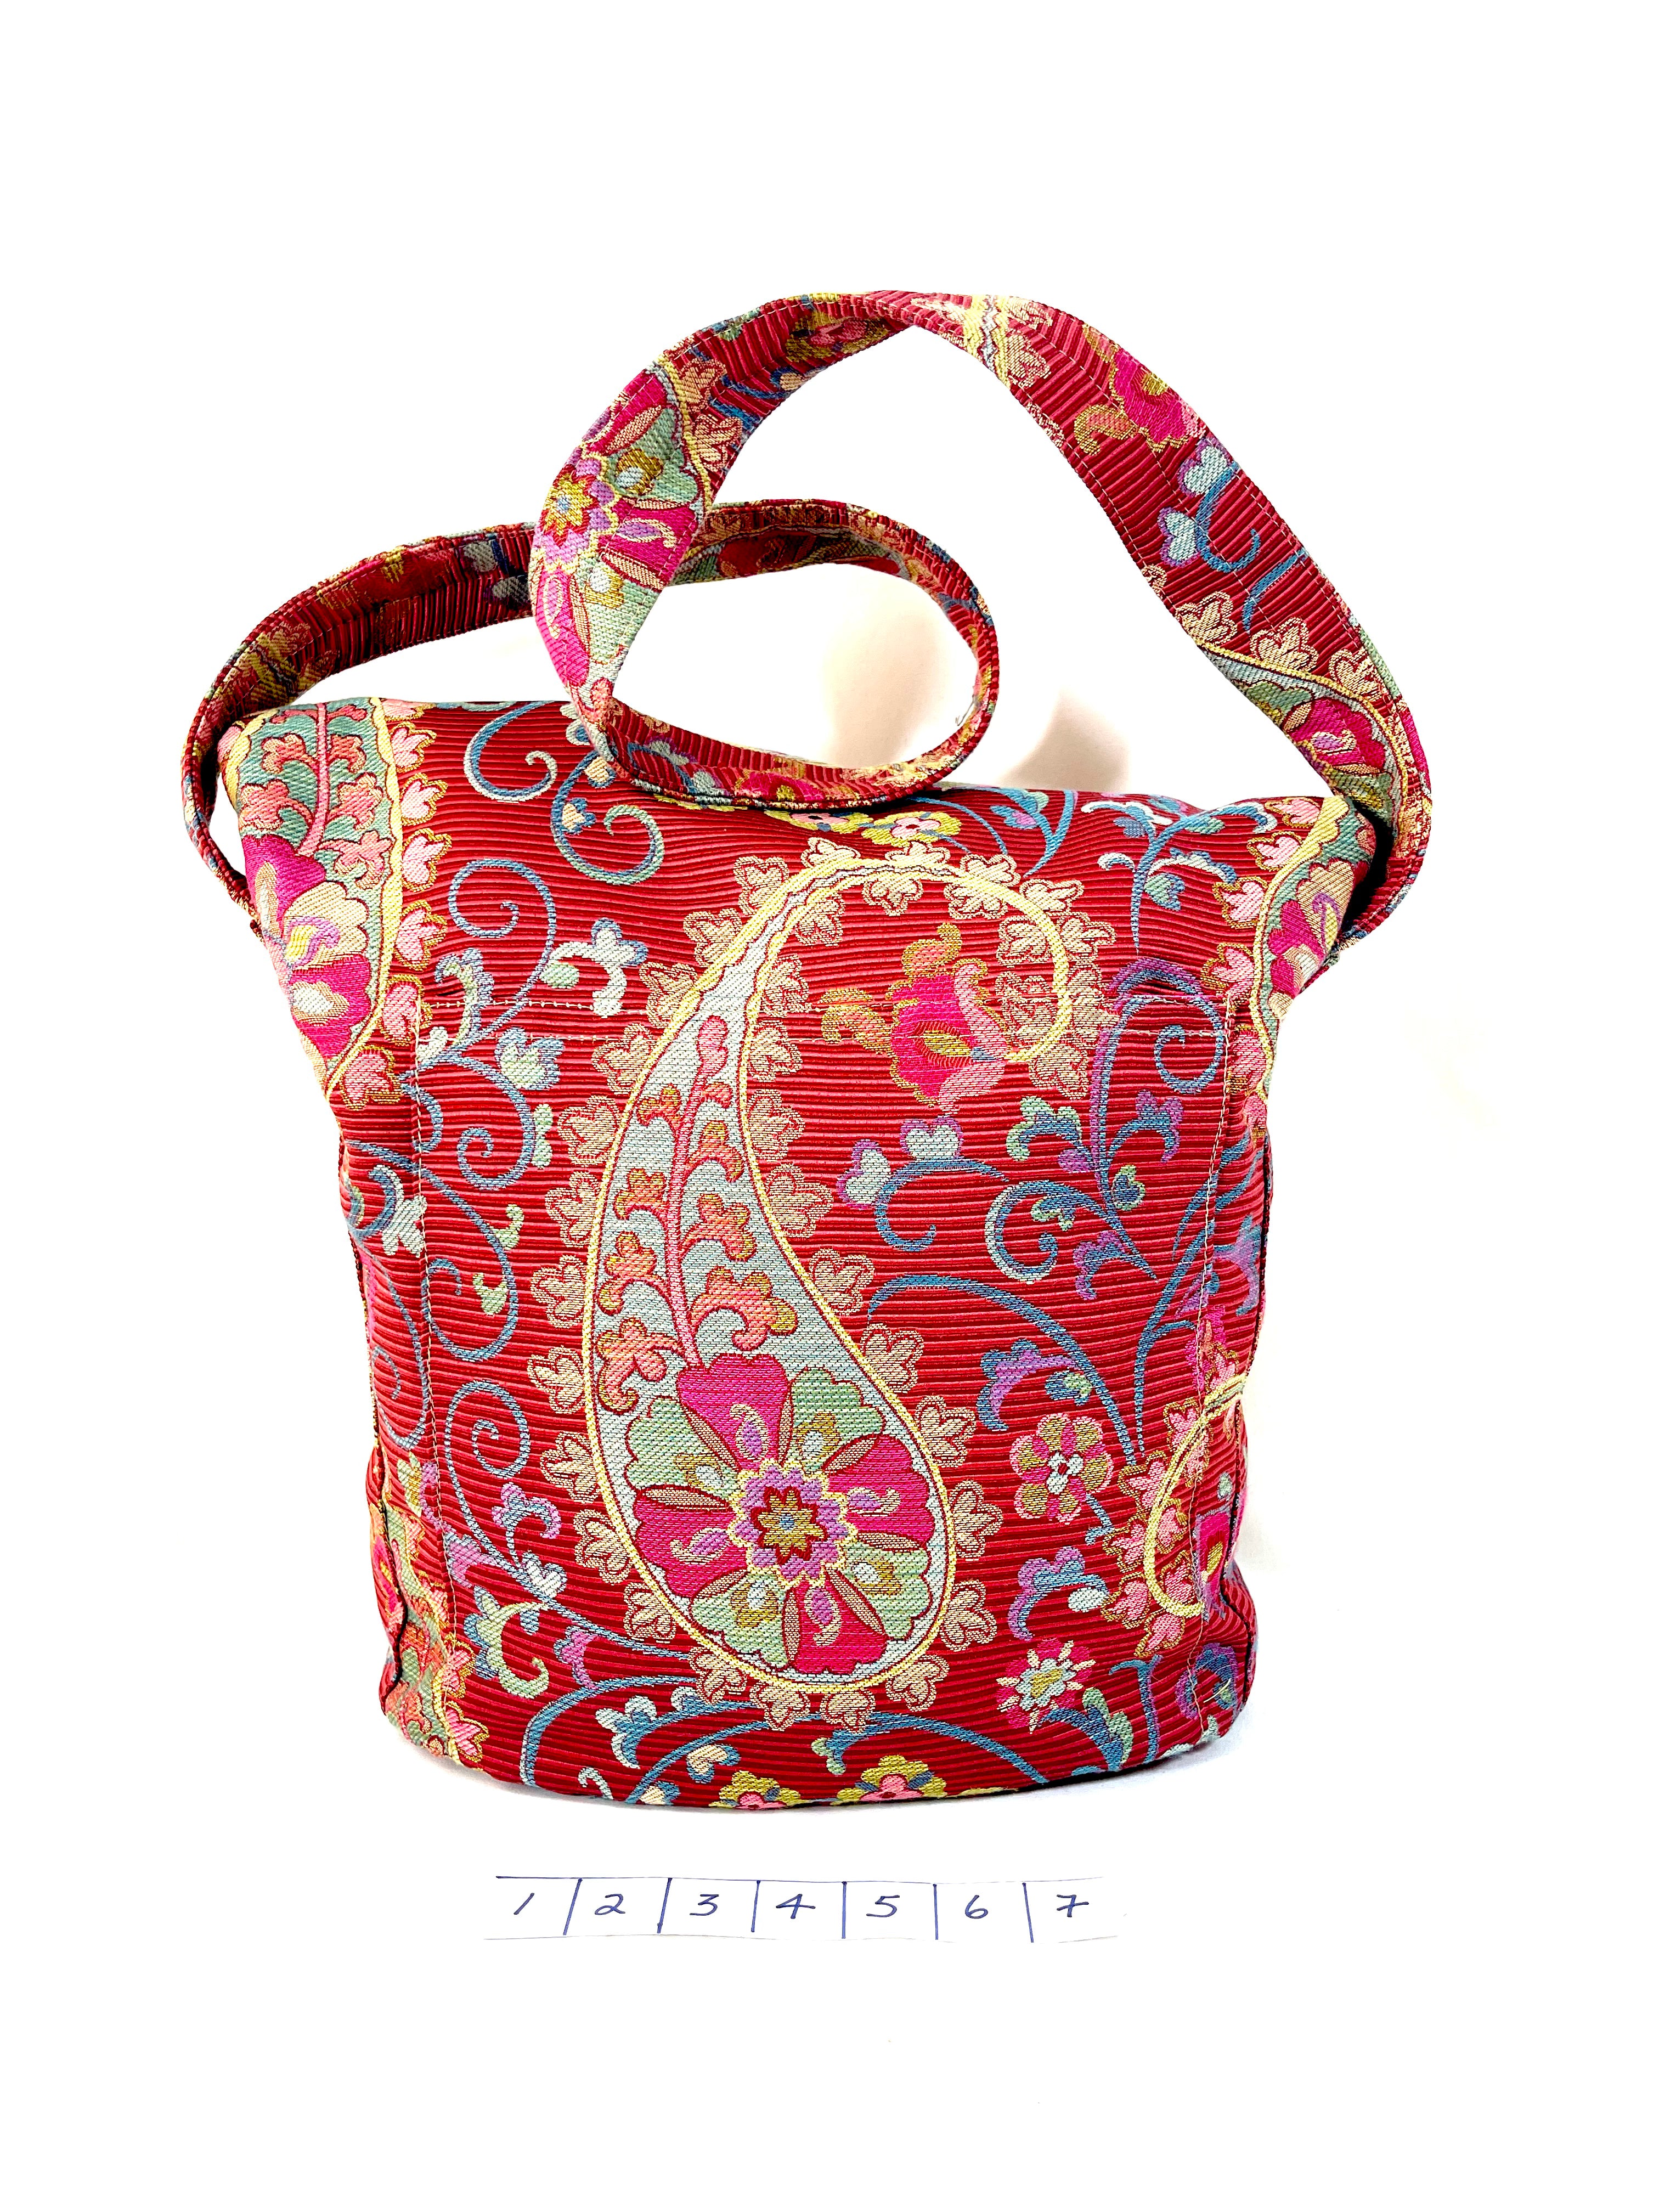 Sack Purse in Pink Paisley Tapestry